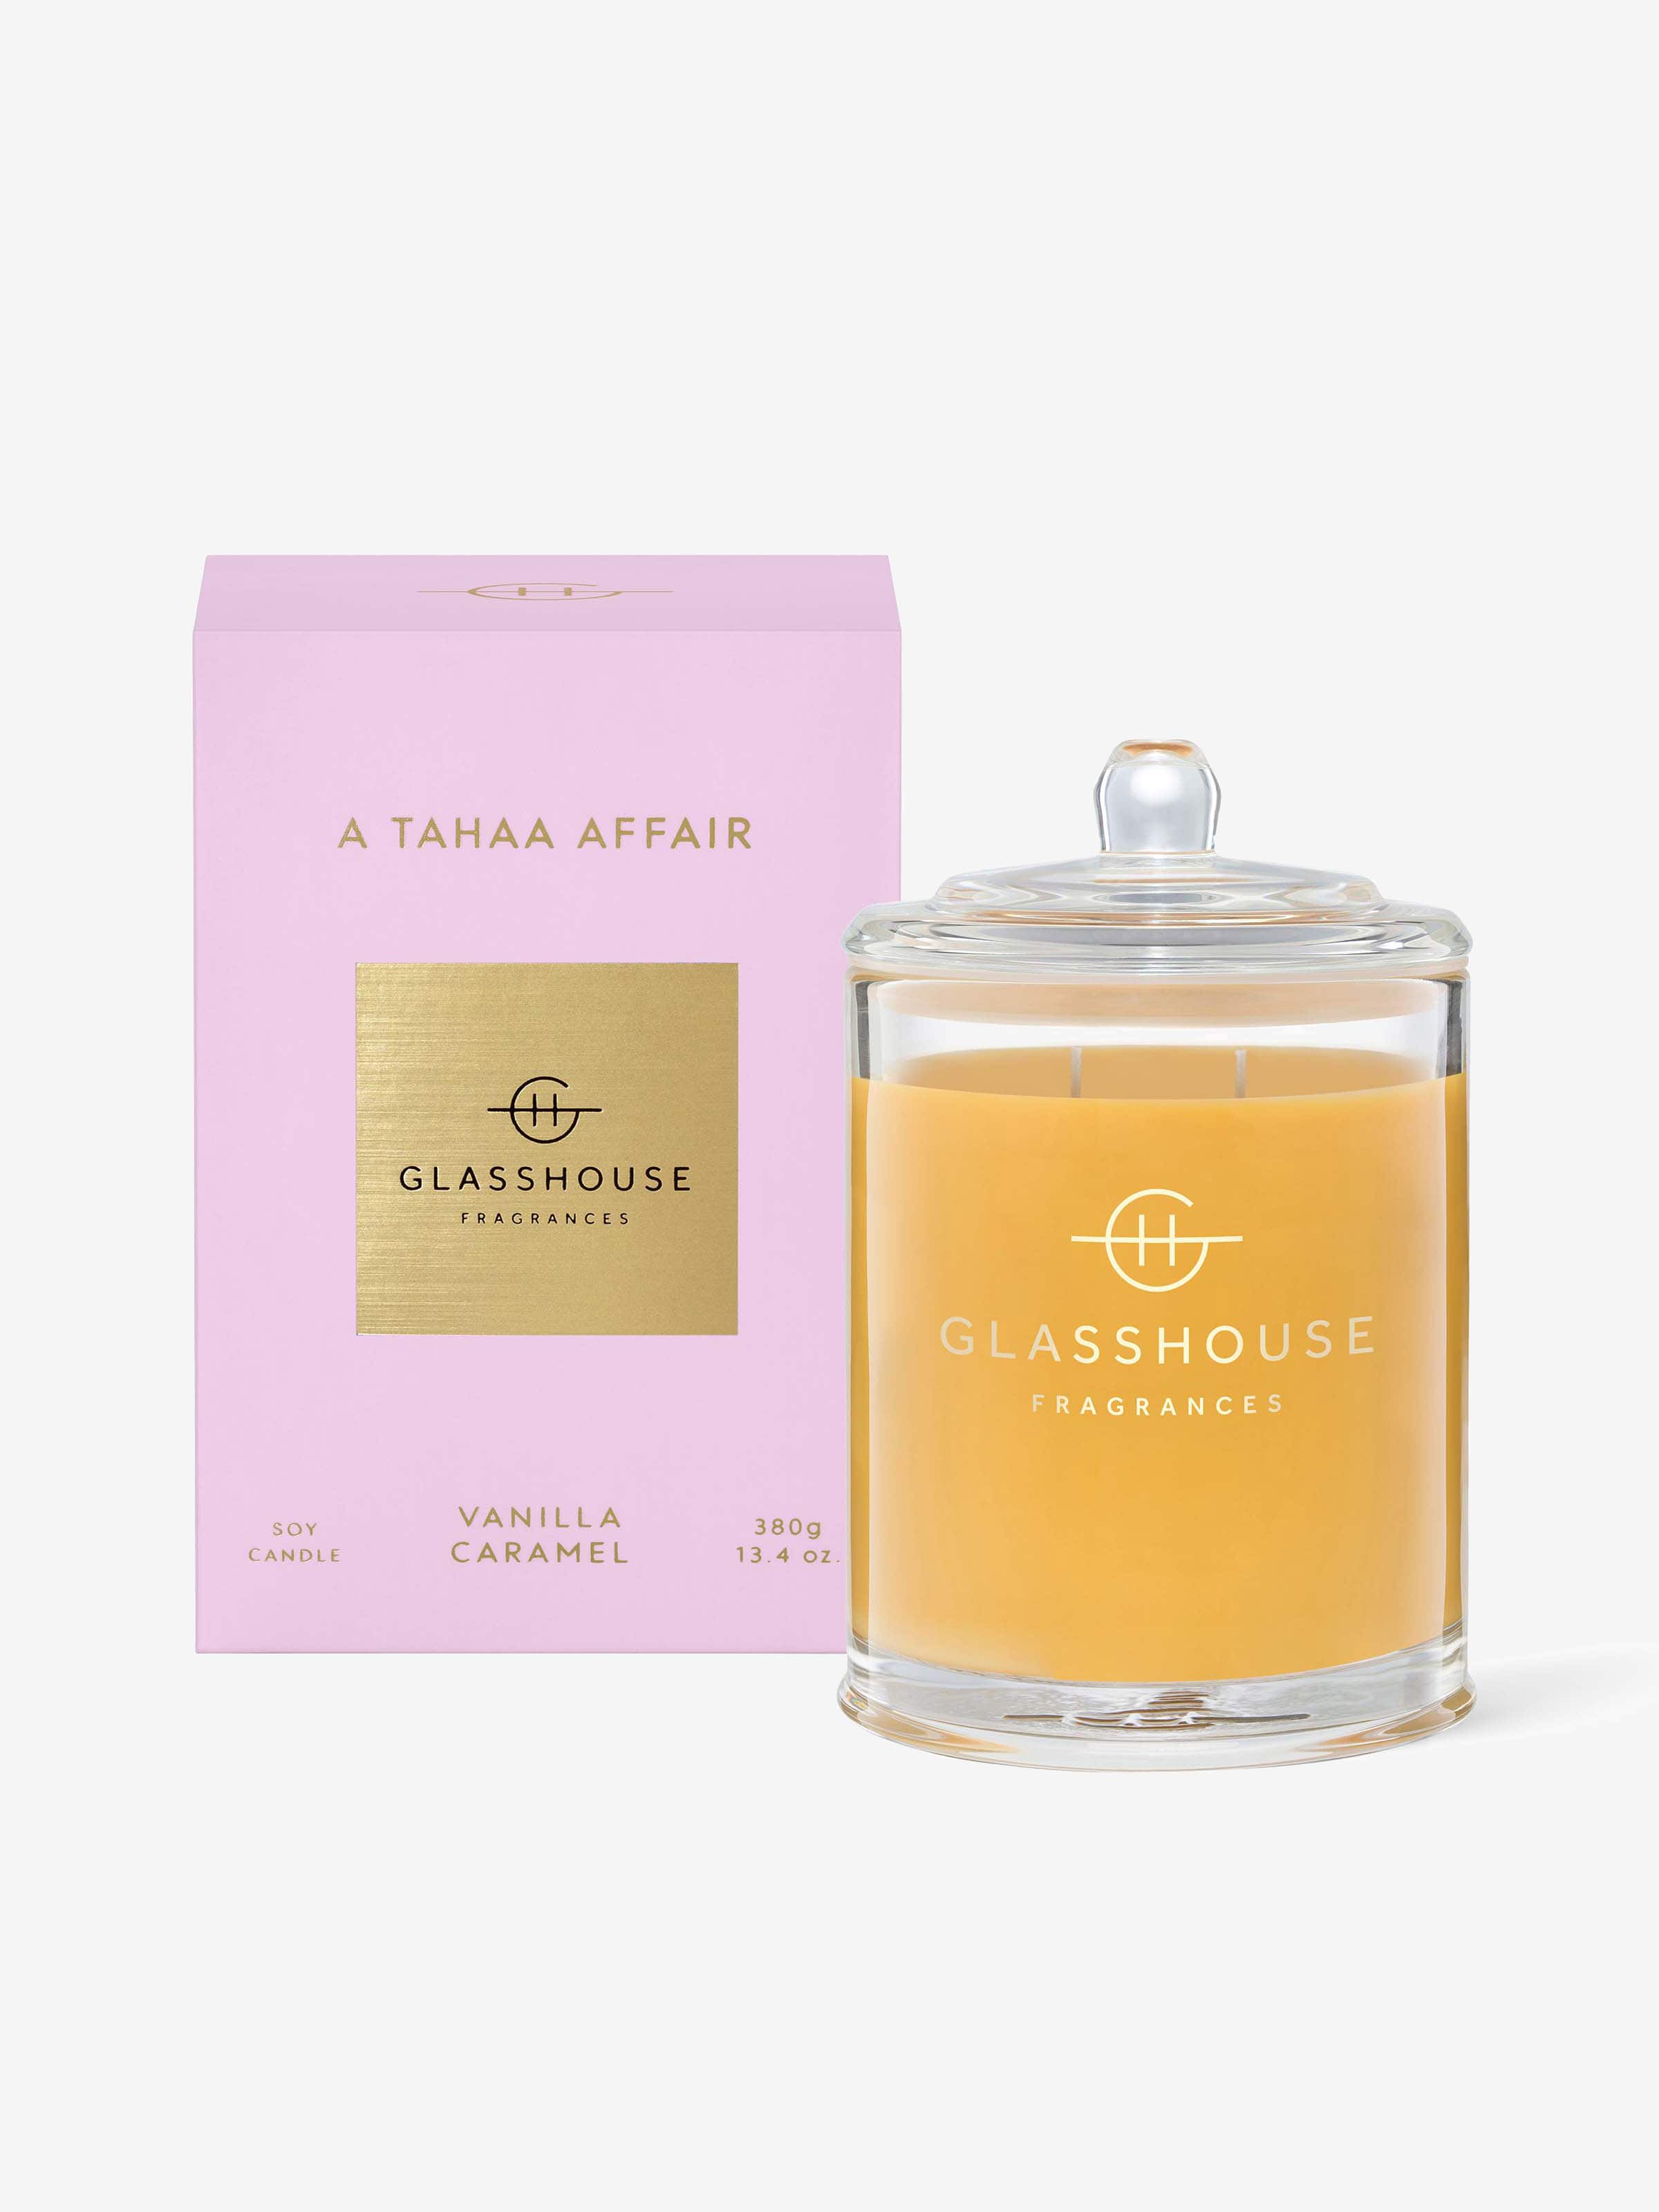 Glasshouse Fragrances Soy Candle 380G Tahaa Affair - Peter Alexander Online